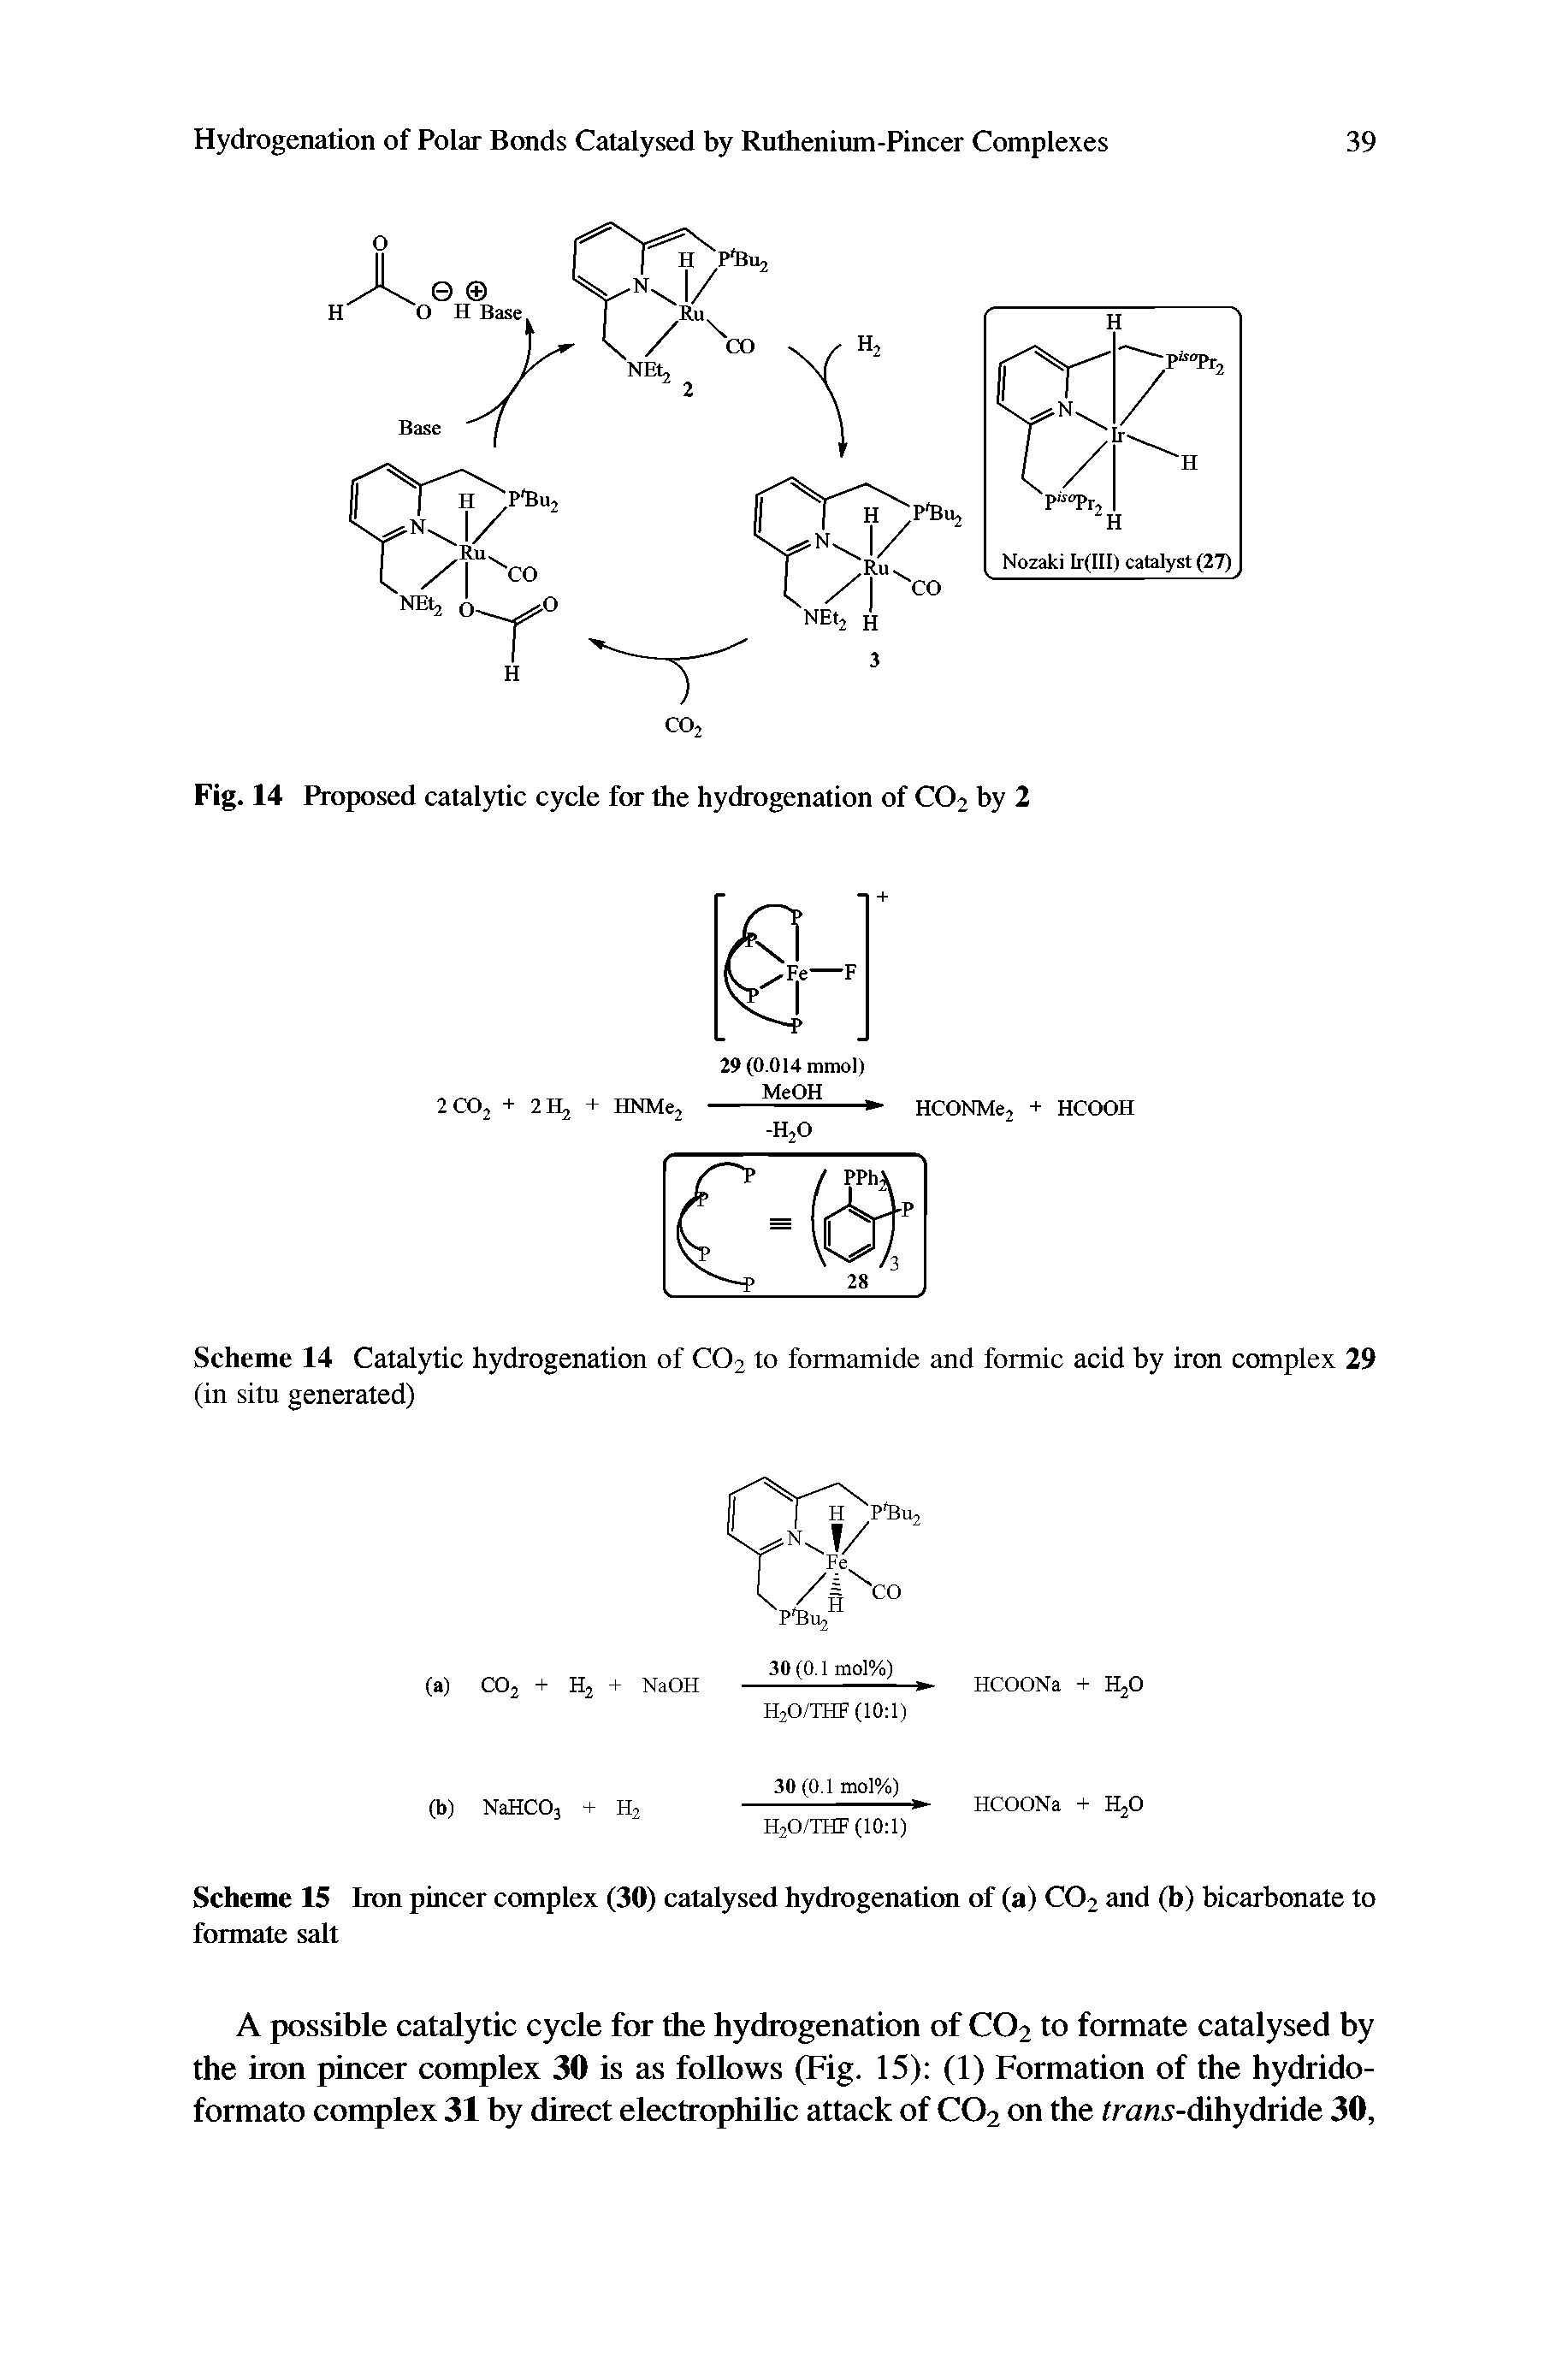 Scheme 15 Iron pincer complex (30) catalysed hydrogenation of (a) CO2 and (b) bicarbonate to formate salt...